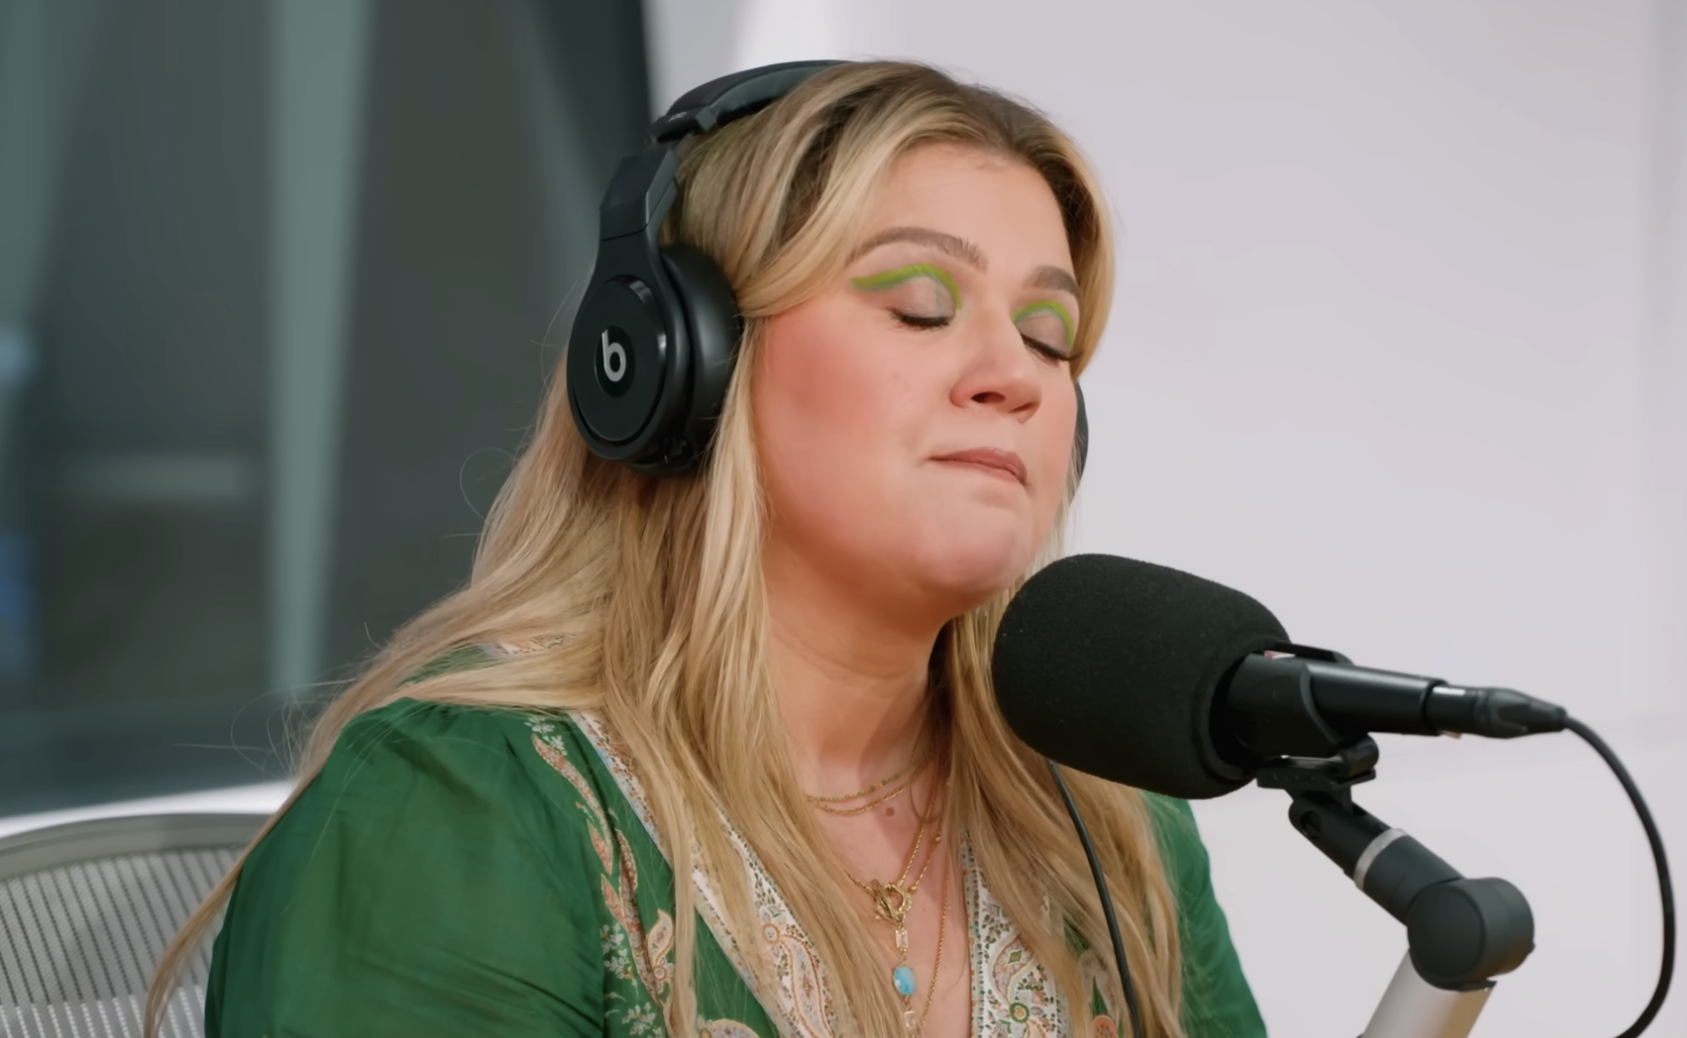 Close-up of Kelly wearing headphones and speaking into a microphone